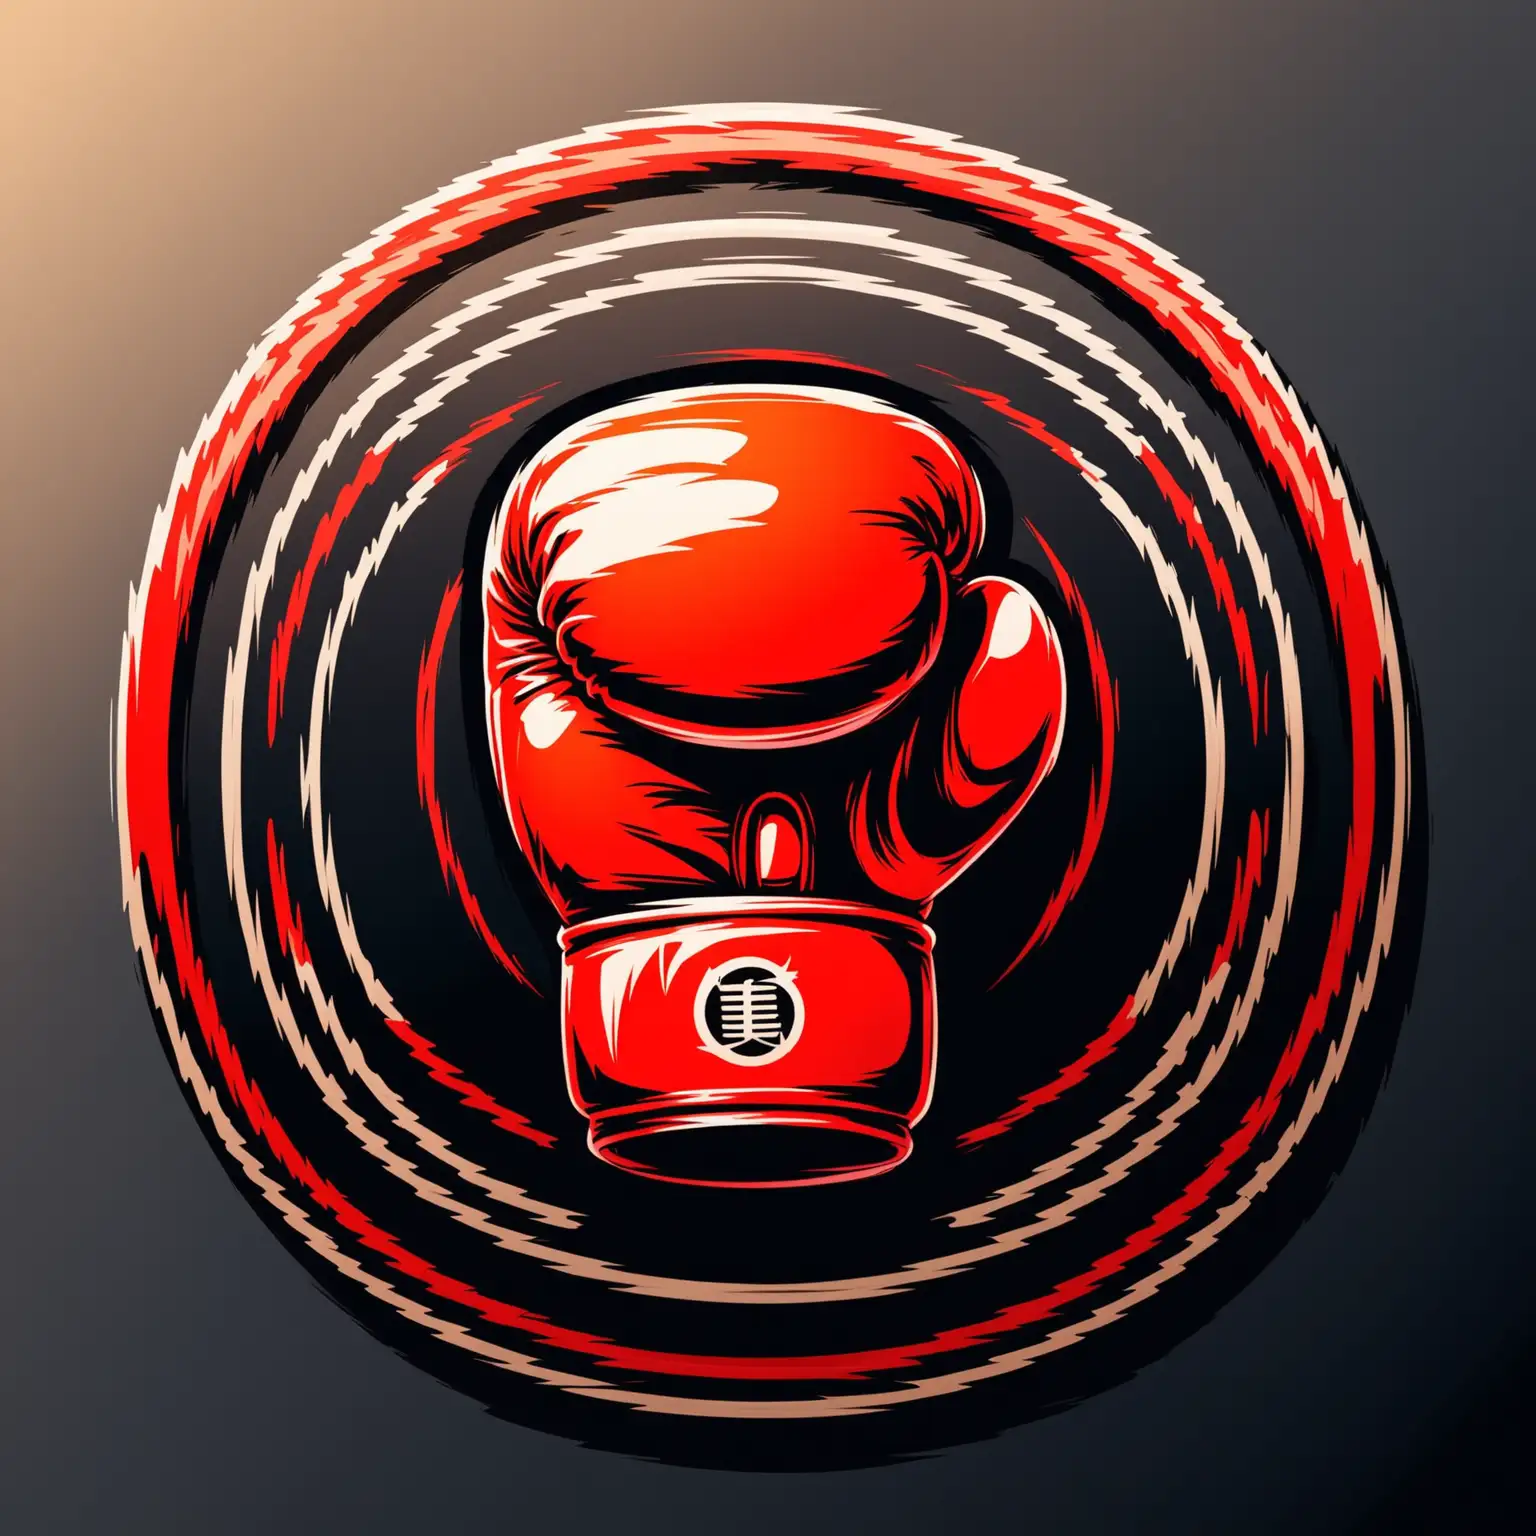 Dynamic Red Boxing Glove Icon on Black and White Background